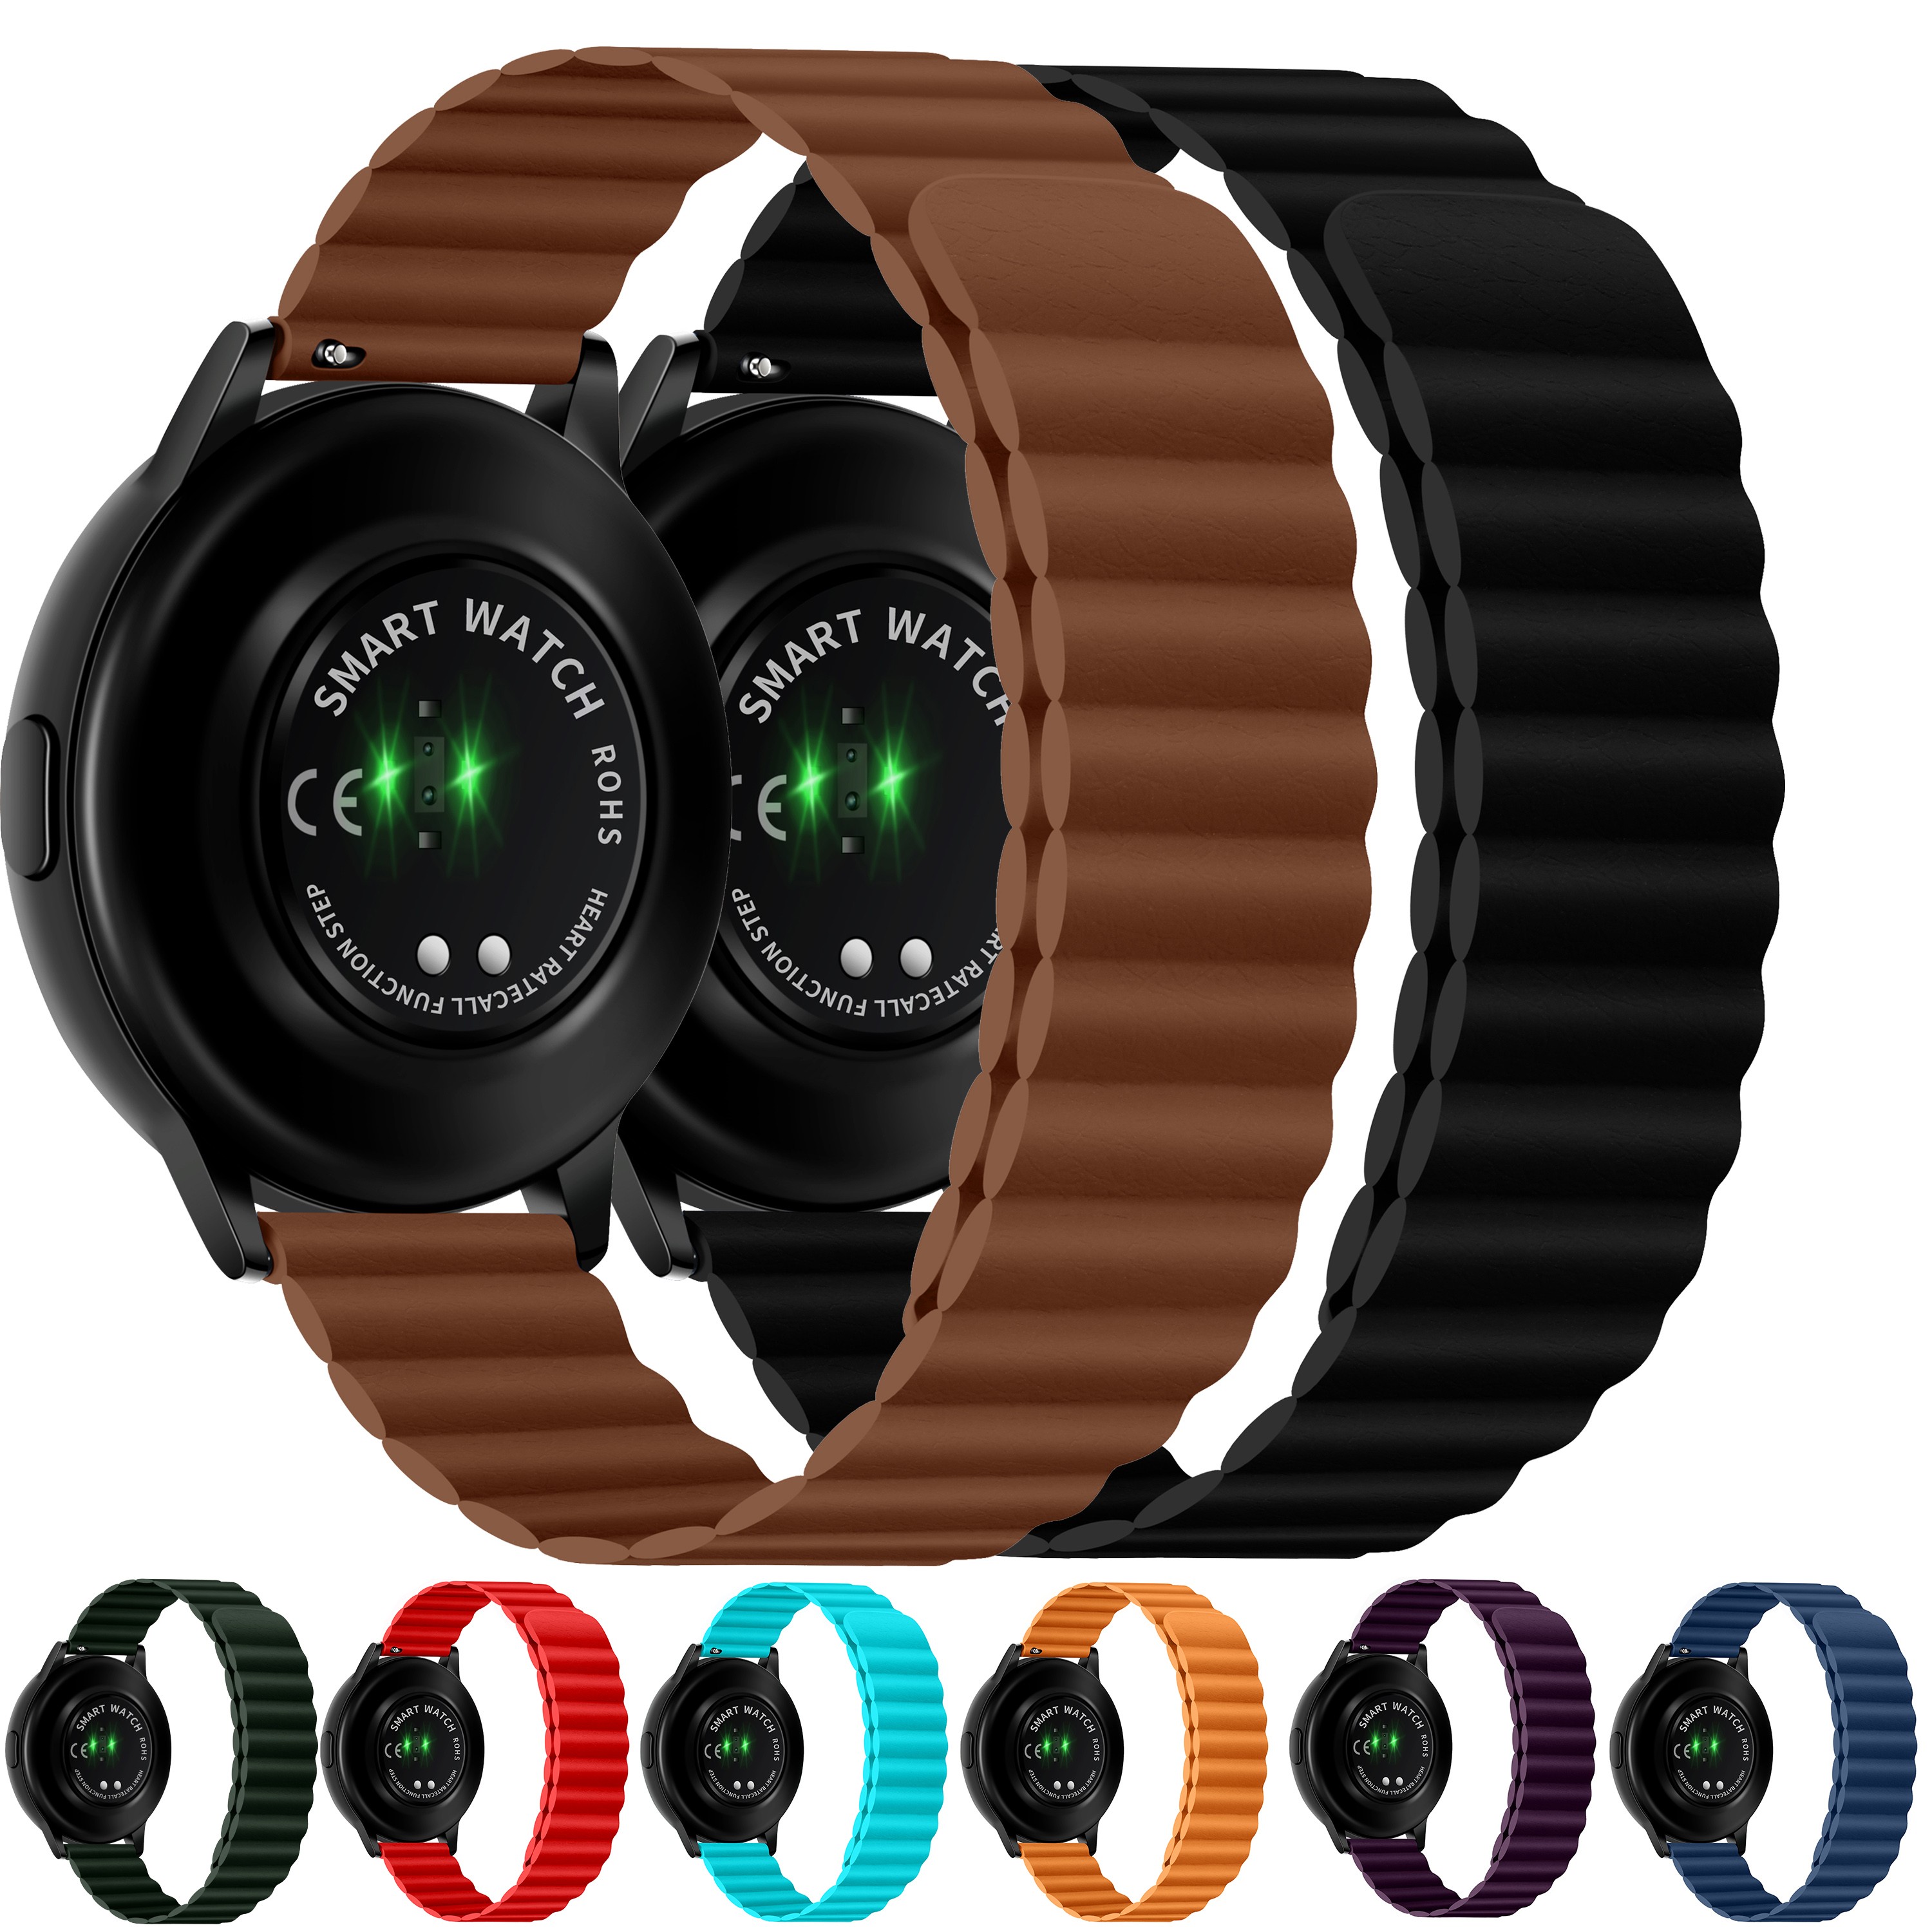 Leather Magnetic Watch Strap for Samsung Galaxy Watch 42/46mm/active2 Loop Bracelet Huawei Gt 2-2e-pro 20mm 22mm Wrist Watches